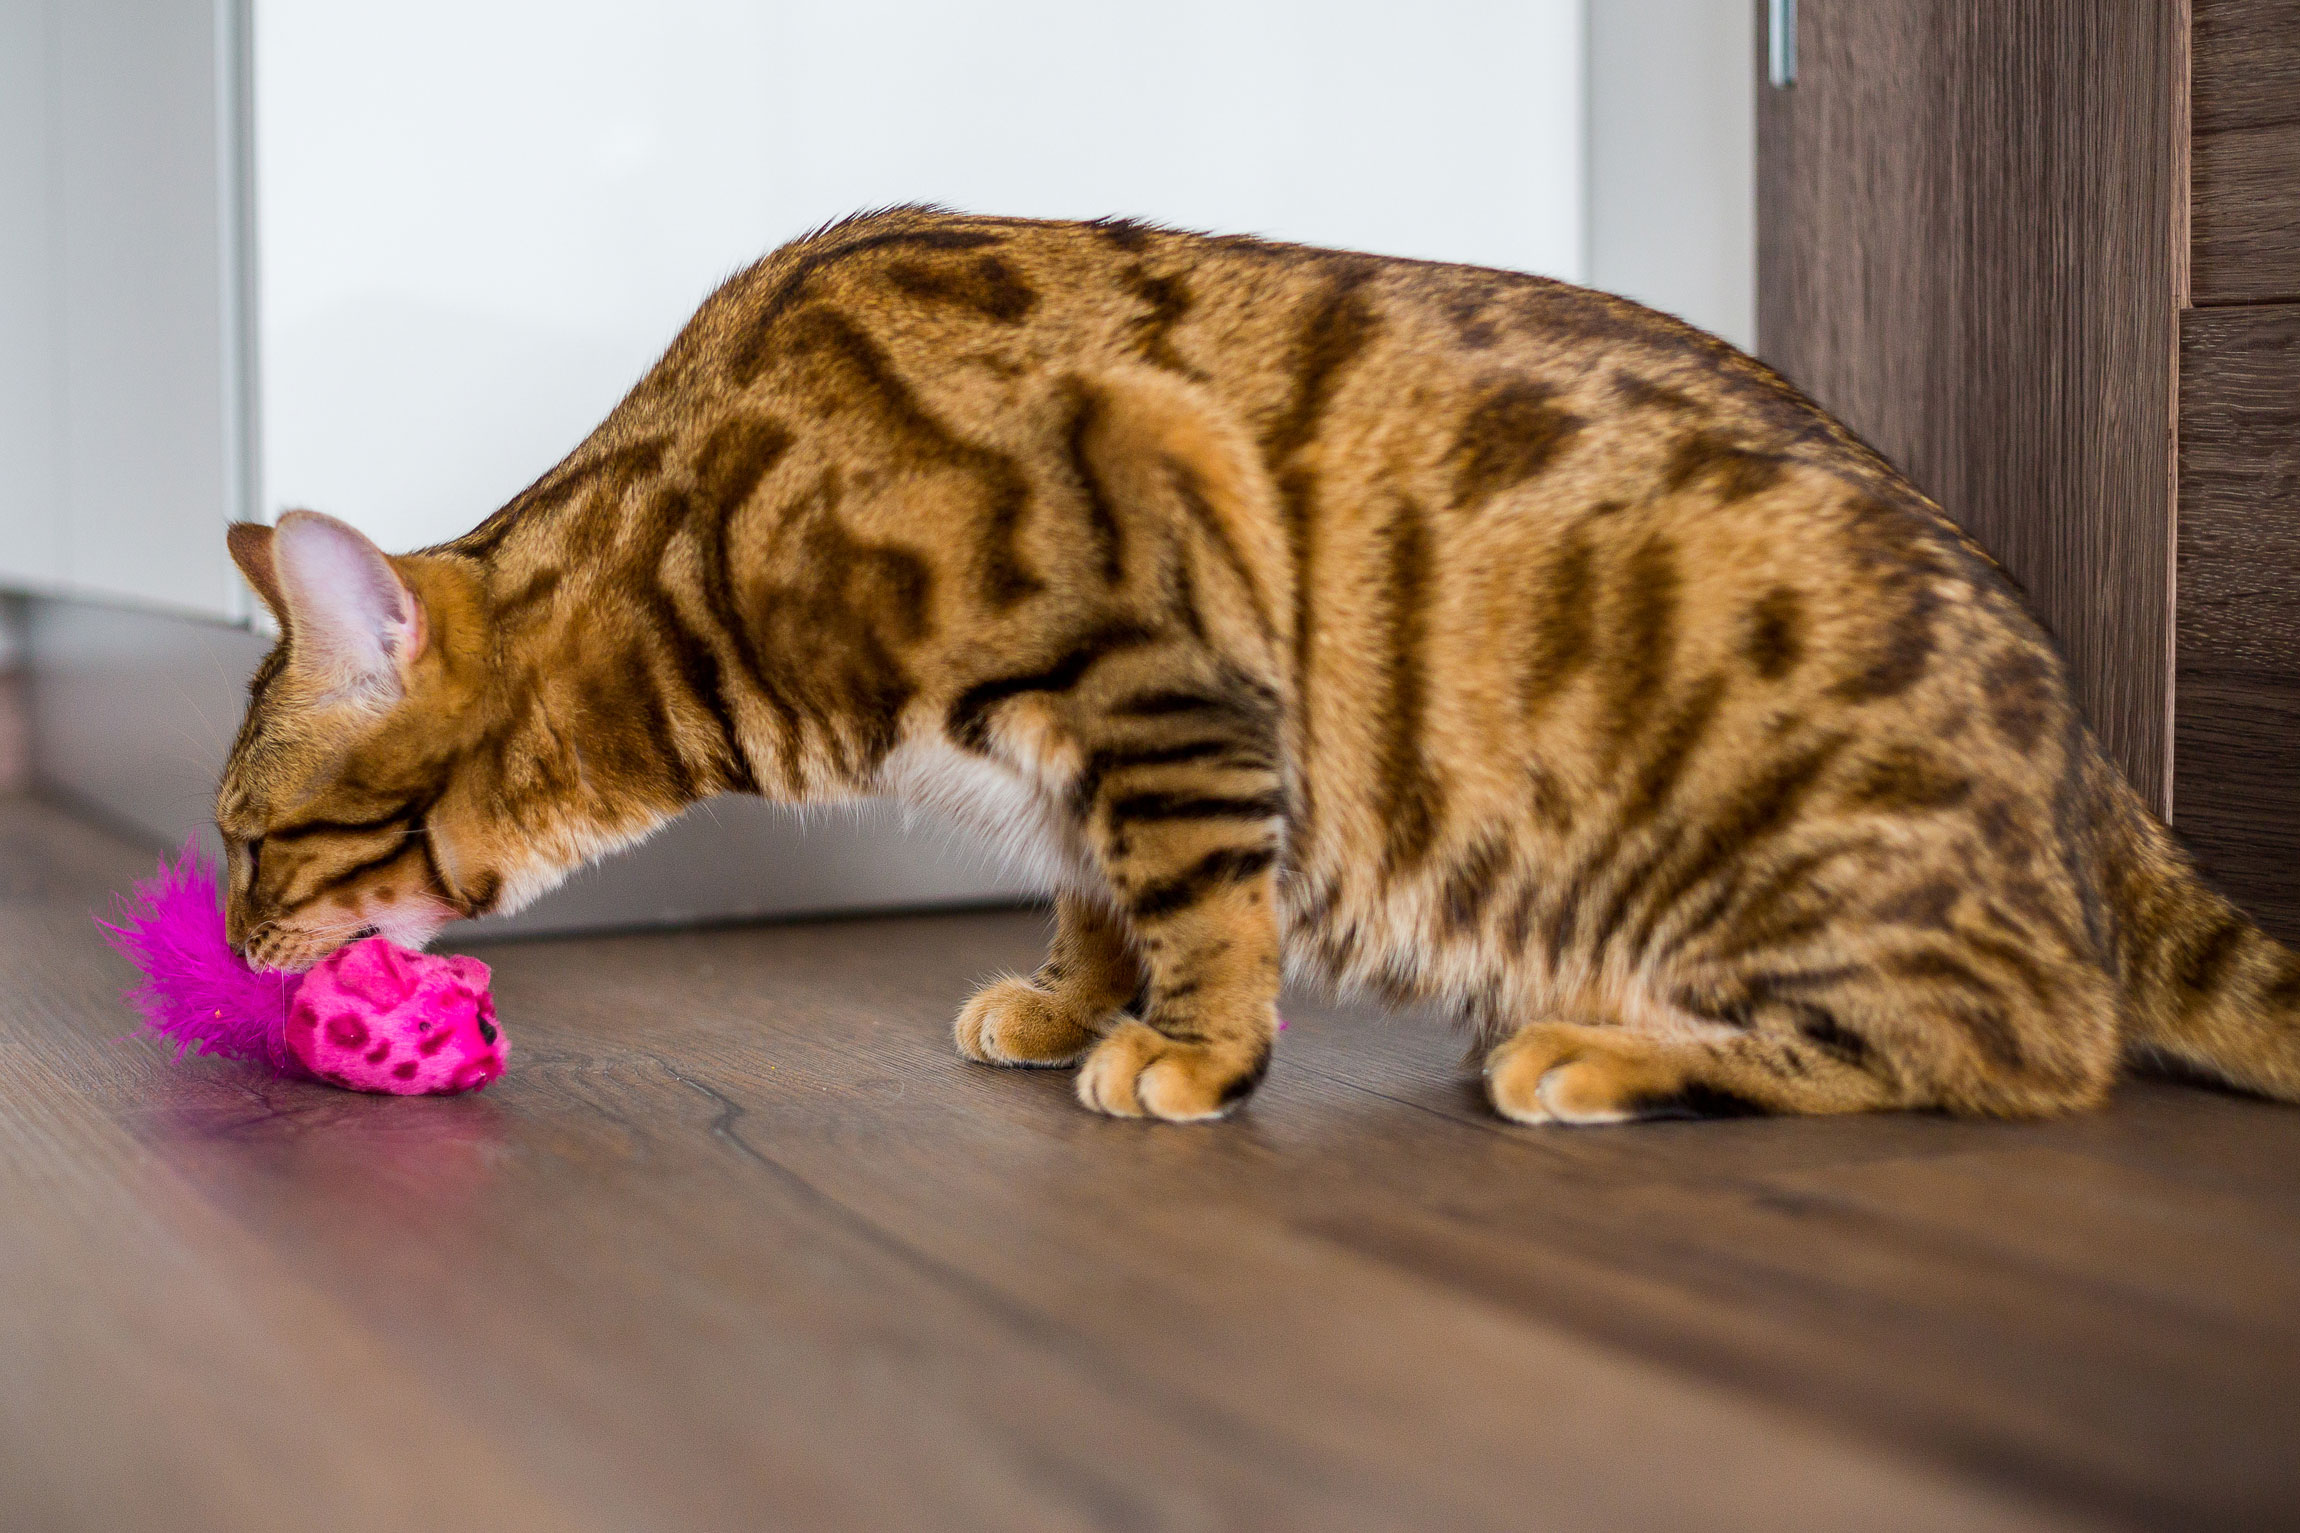 A Bengal cat with a tabby-pattern coat carrying a cat toy.